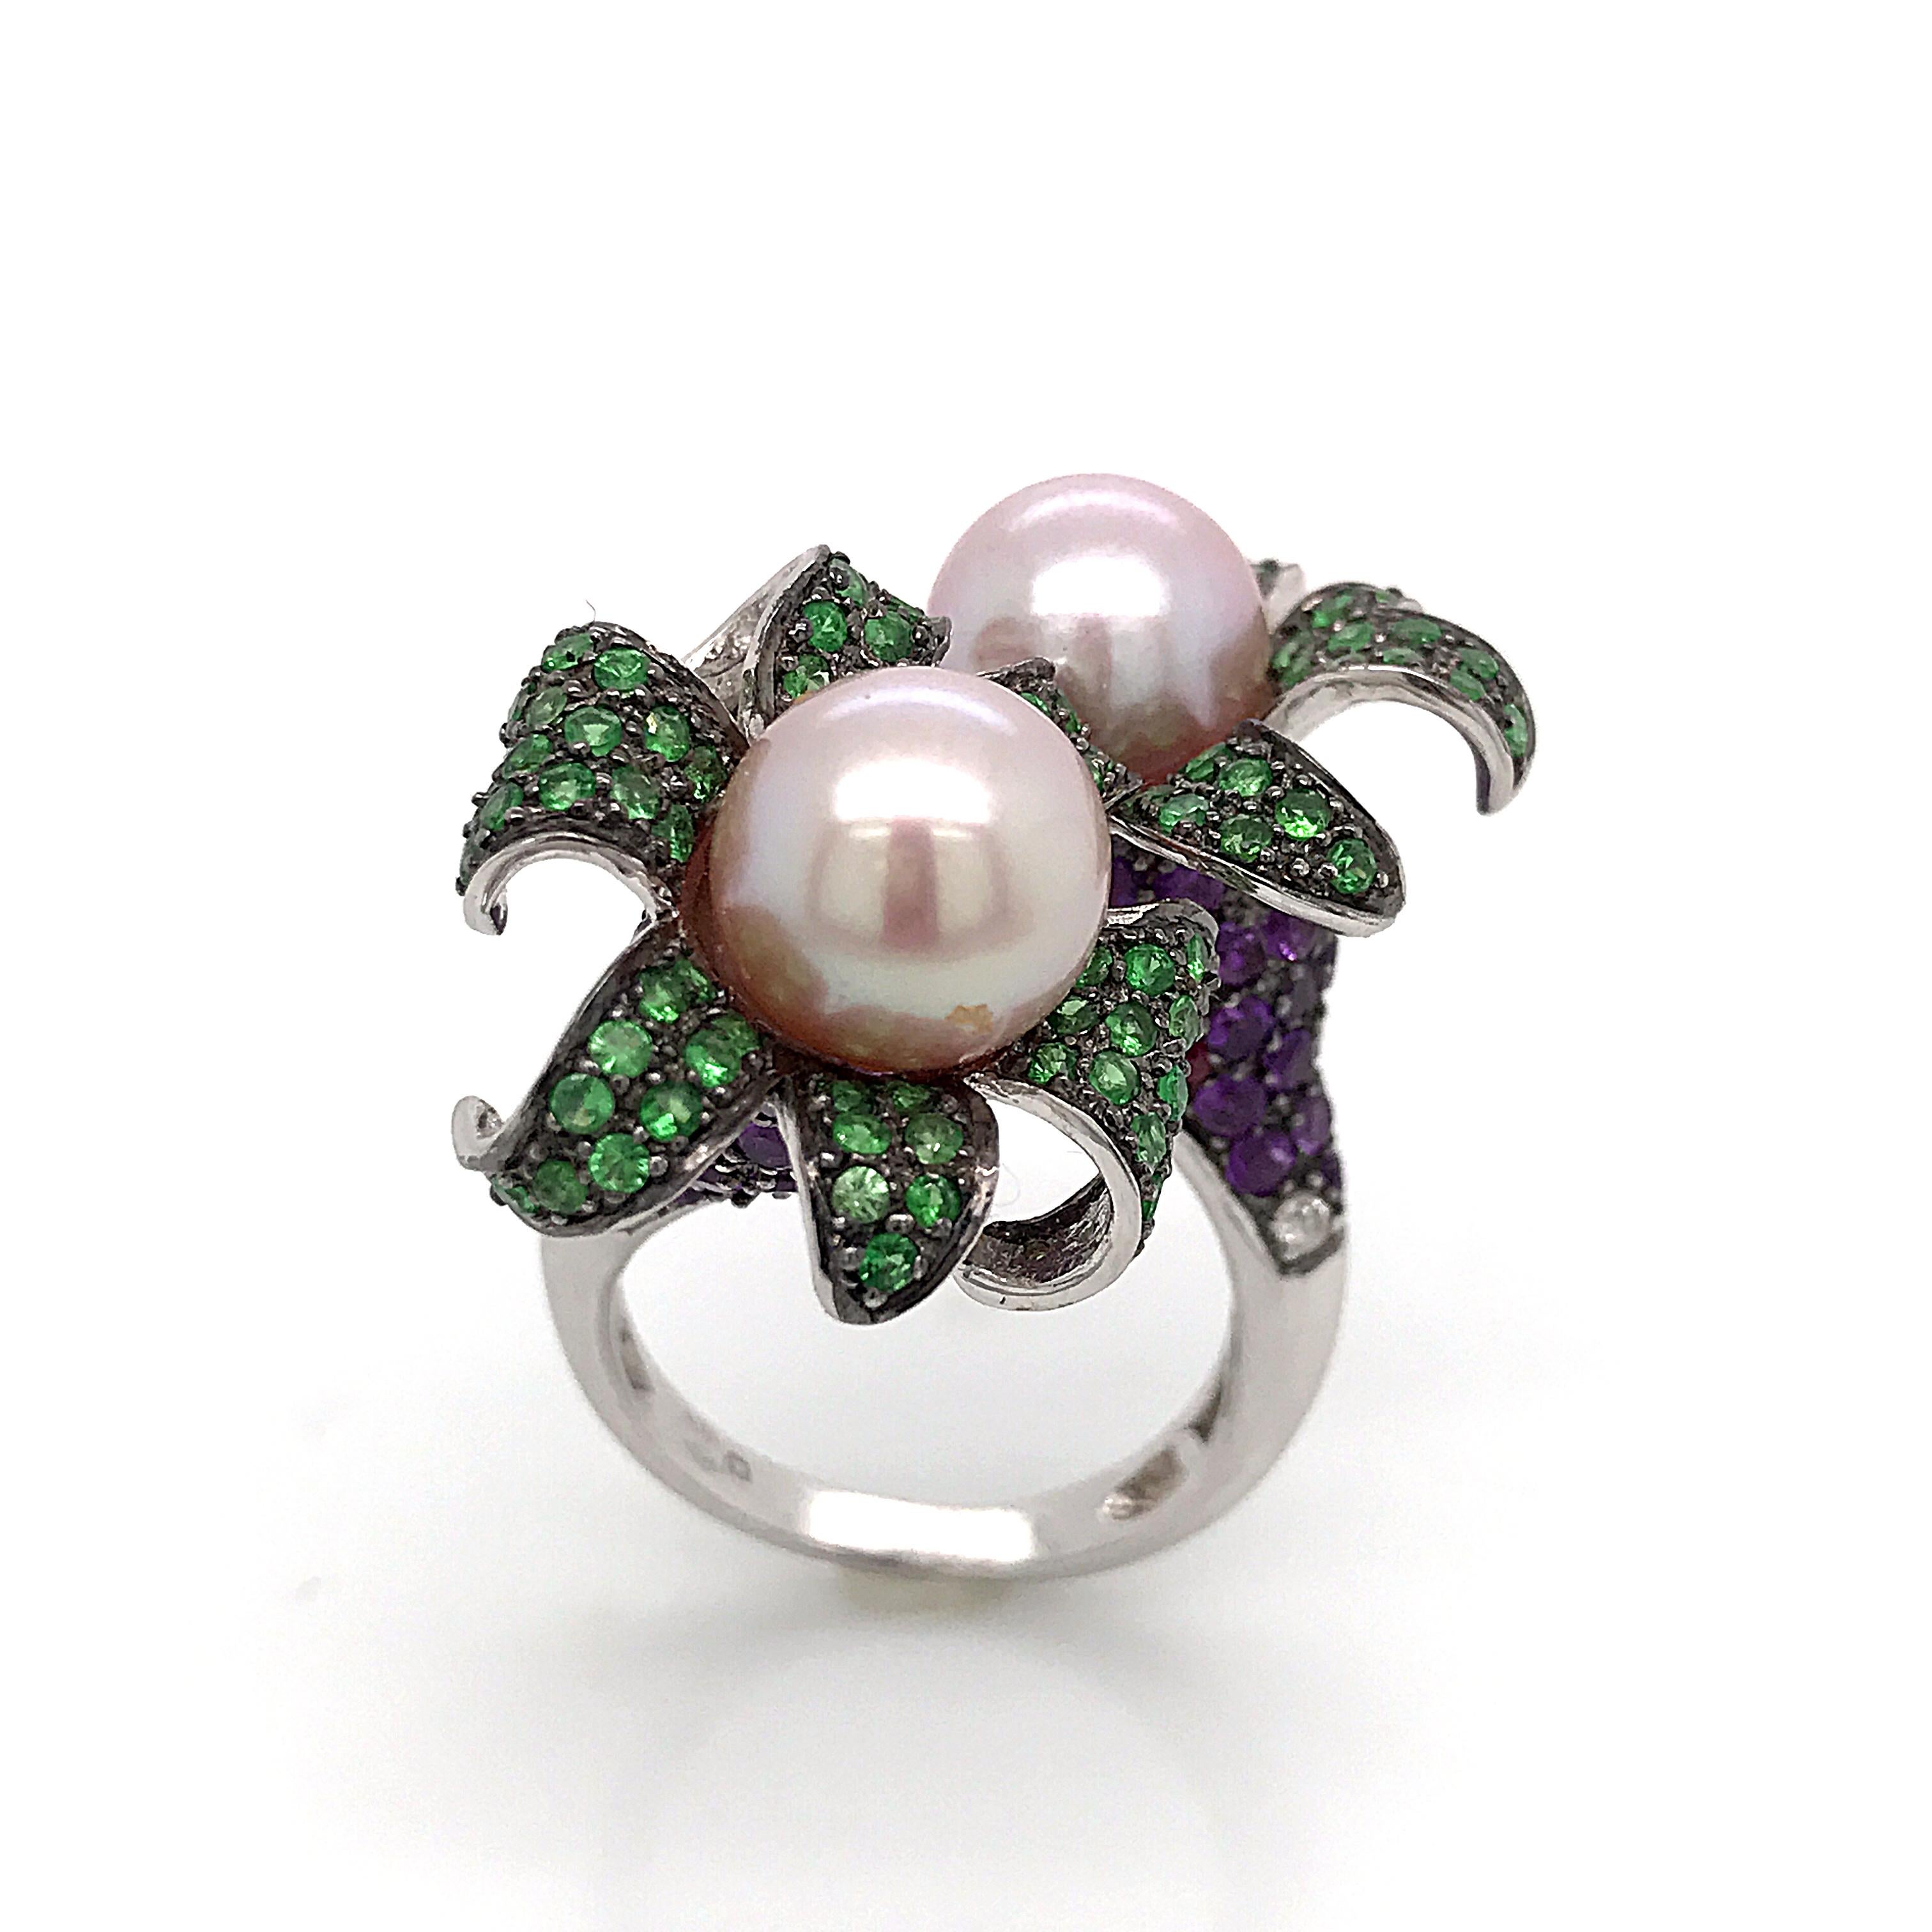 Discover this remarkable artistic ring, a true masterpiece of jewellery, harmoniously combining the brilliance of emerald, amethyst, diamond and ruby cultured pearls with the timeless elegance of the 18-carat white gold setting. This exceptional